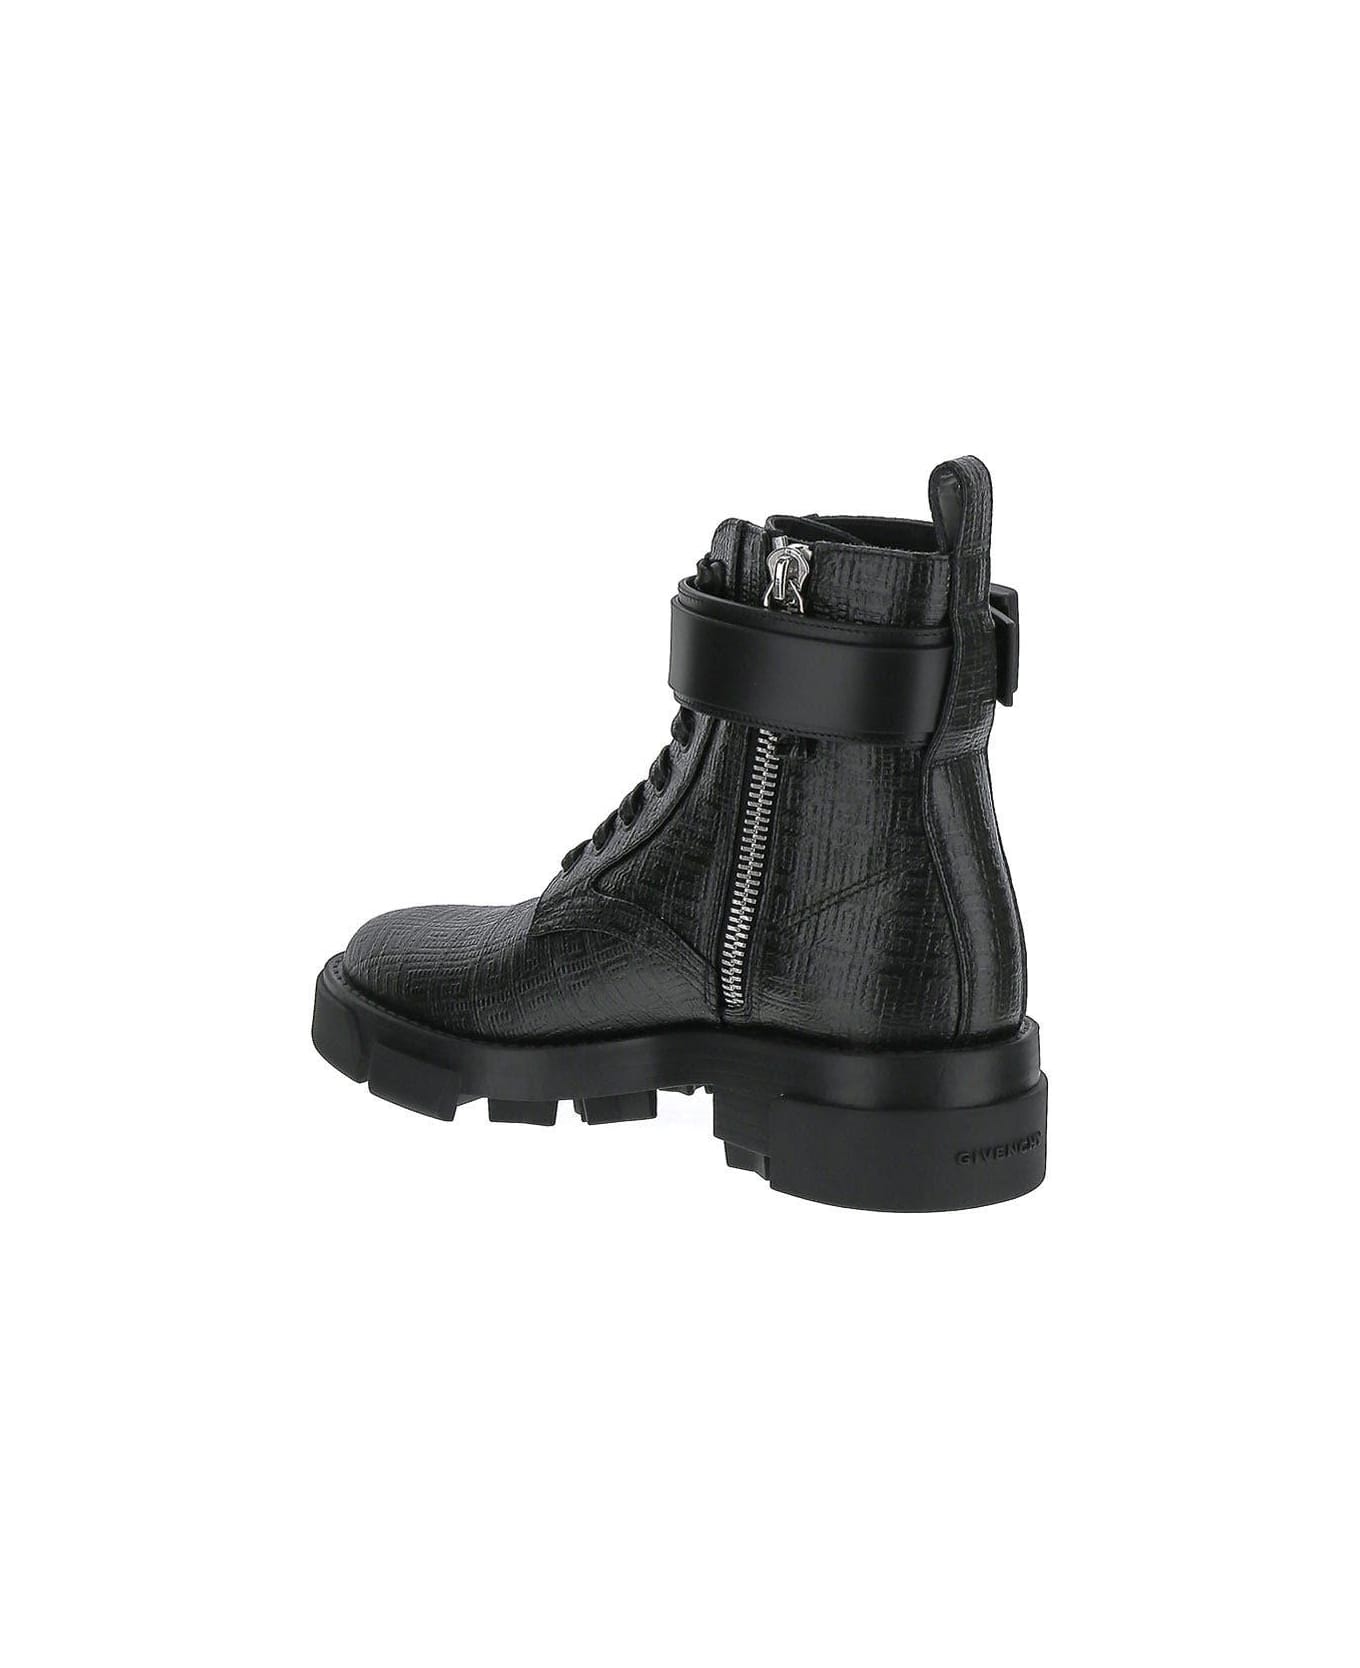 Givenchy Terra Boots - Black ブーツ